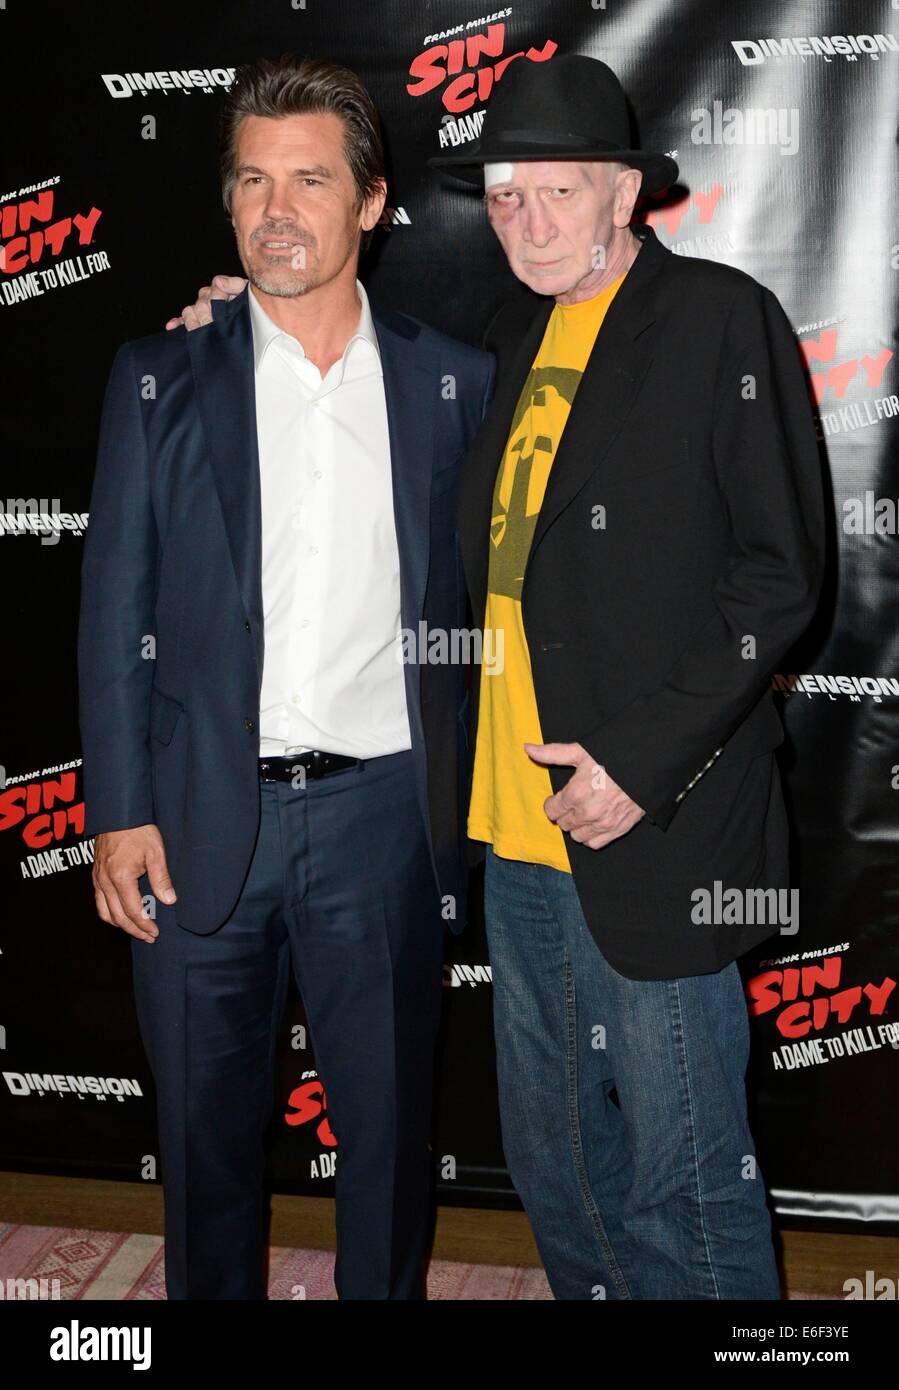 New York, NY, USA. 21st Aug, 2014. Josh Brolin, Frank Miller in attendance for SIN CITY: A DAME TO KILL FOR Photo Opportunity, Crosby Street Hotel, New York, NY August 21, 2014. © Derek Storm/Everett Collection/Alamy Live News Stock Photo